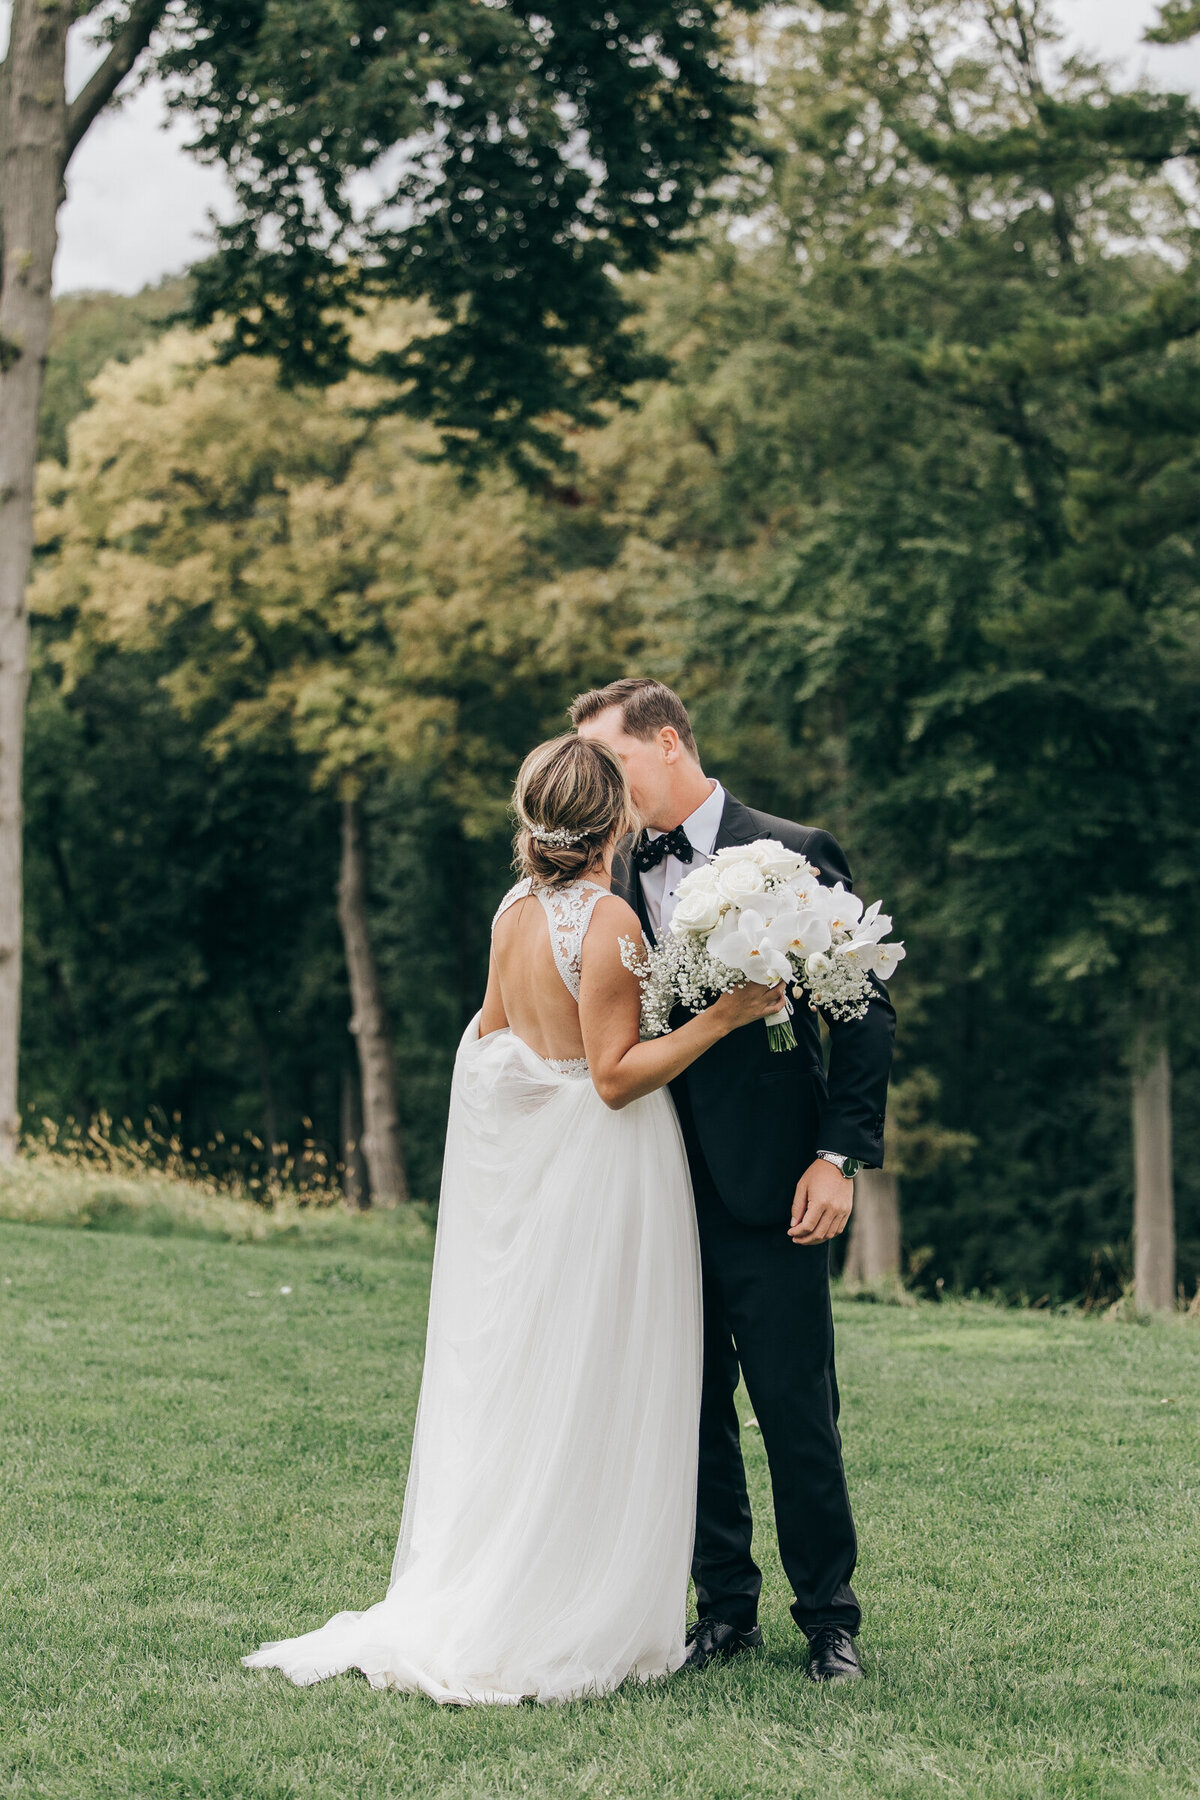 Bride and groom kissing after a romantic first look